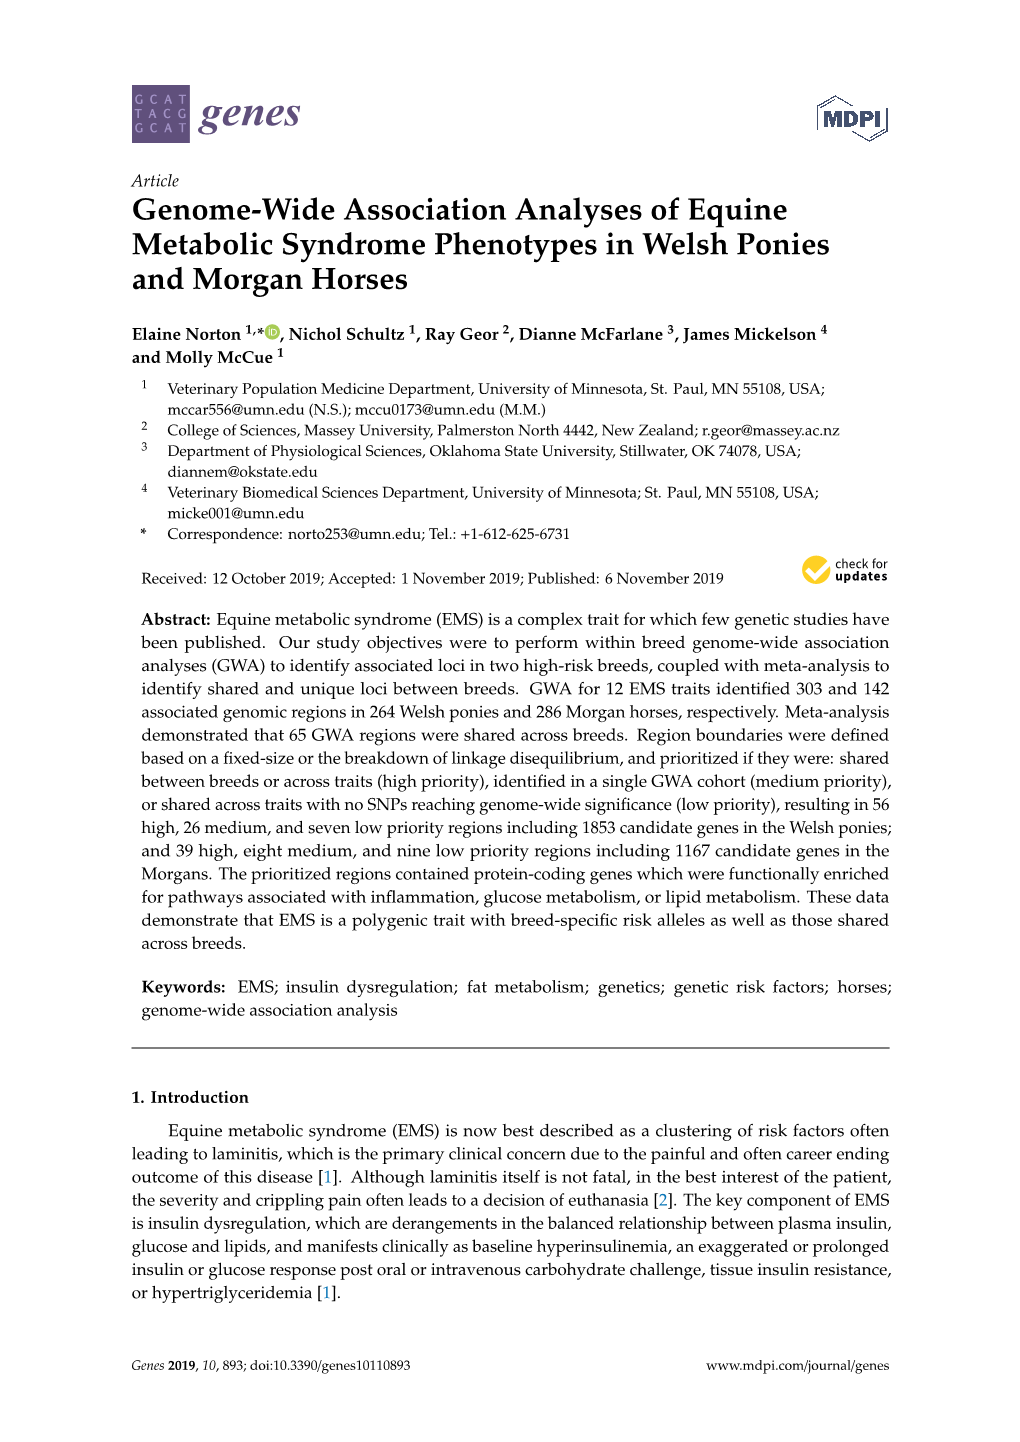 Genome-Wide Association Analyses of Equine Metabolic Syndrome Phenotypes in Welsh Ponies and Morgan Horses